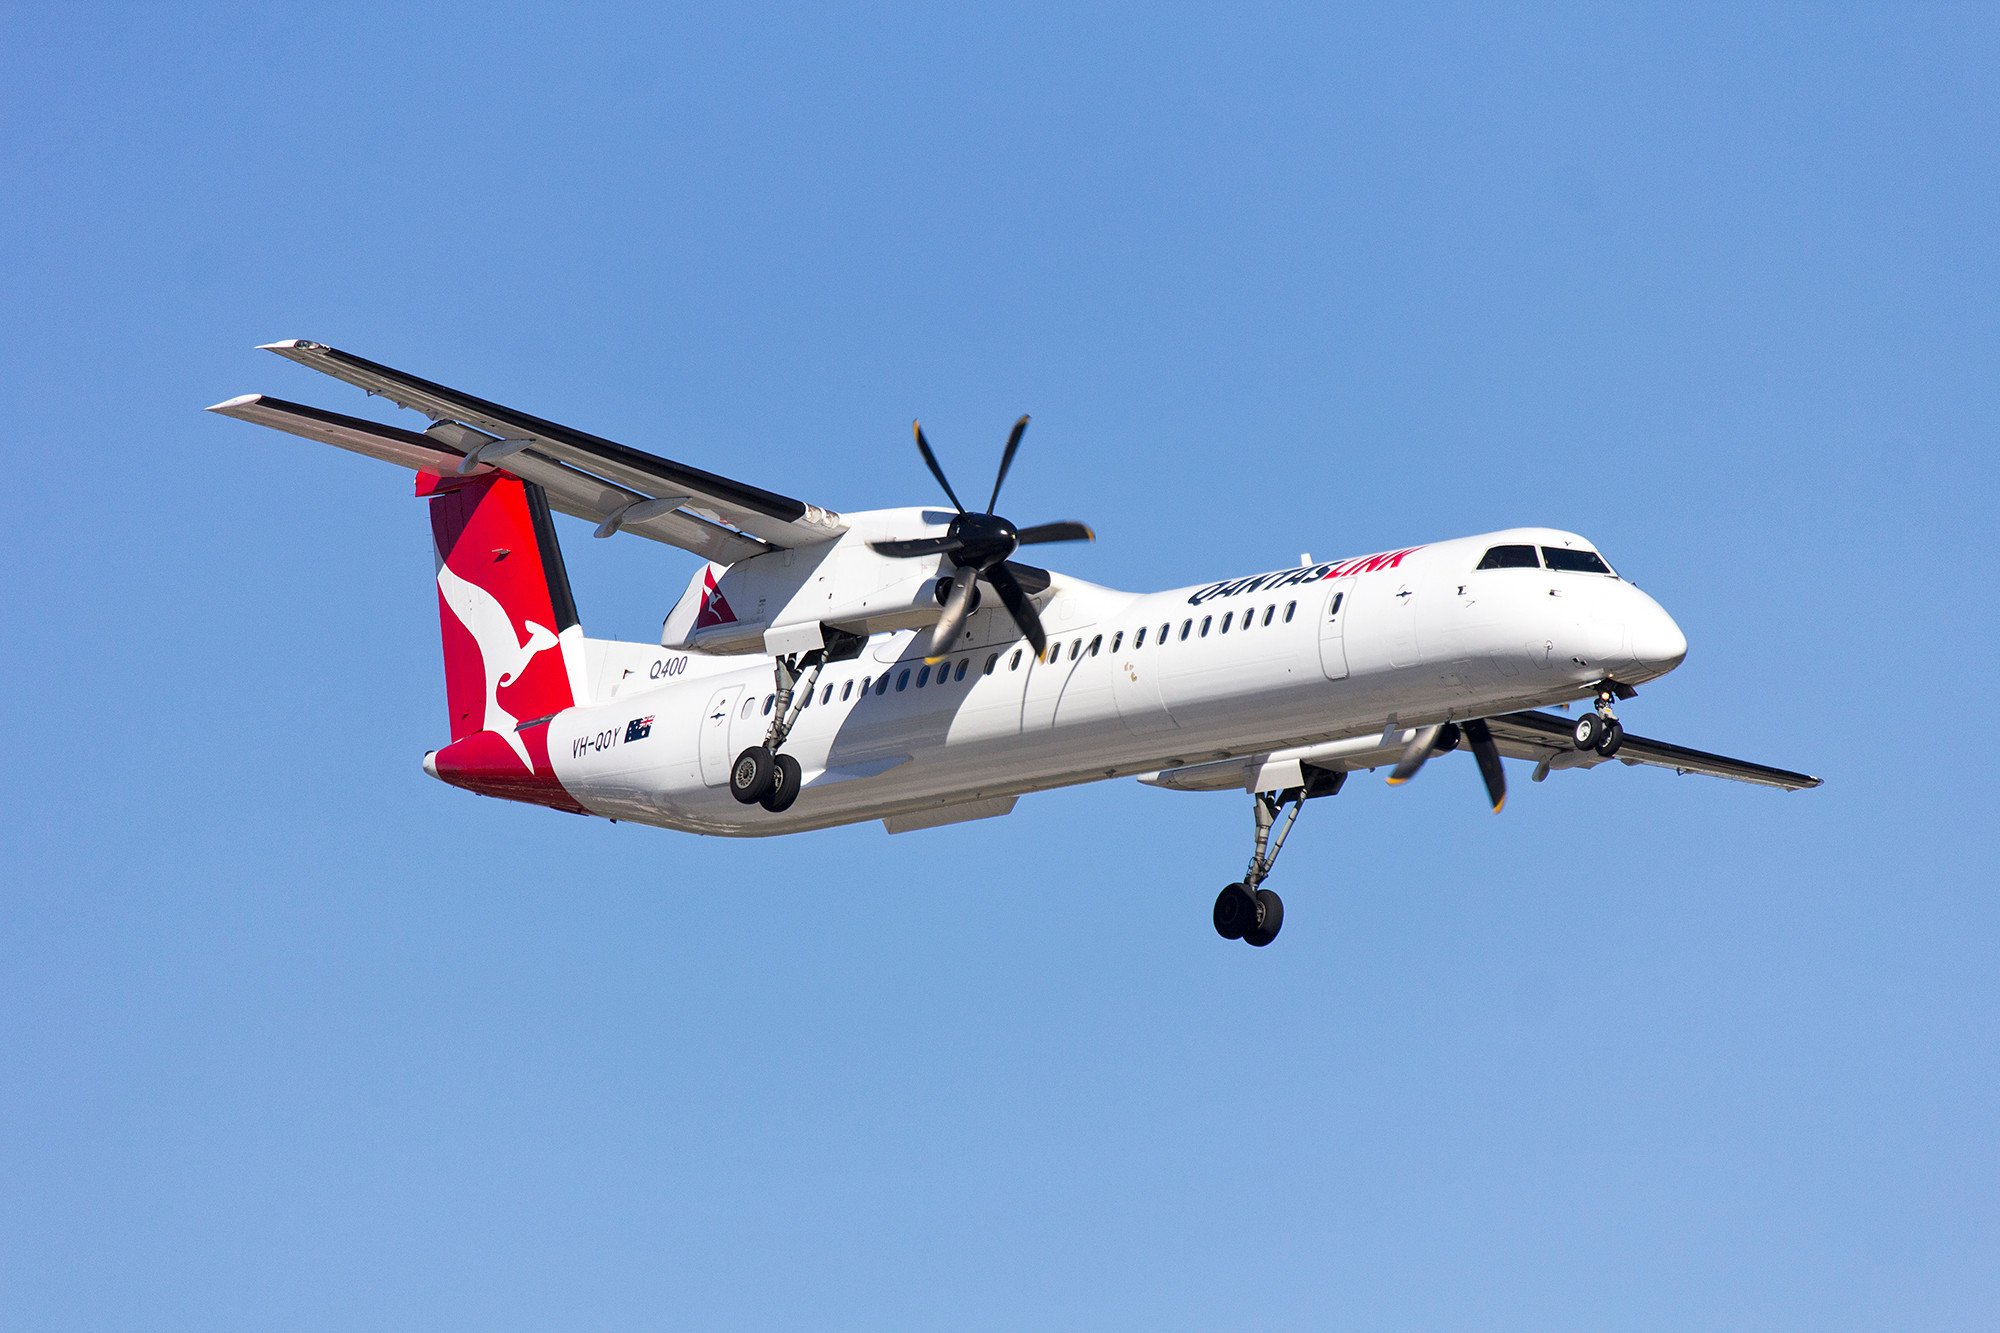 The Dash 8 was being operated by Qantas subsidiary Sunstate Airlines on behalf of QantasLink.